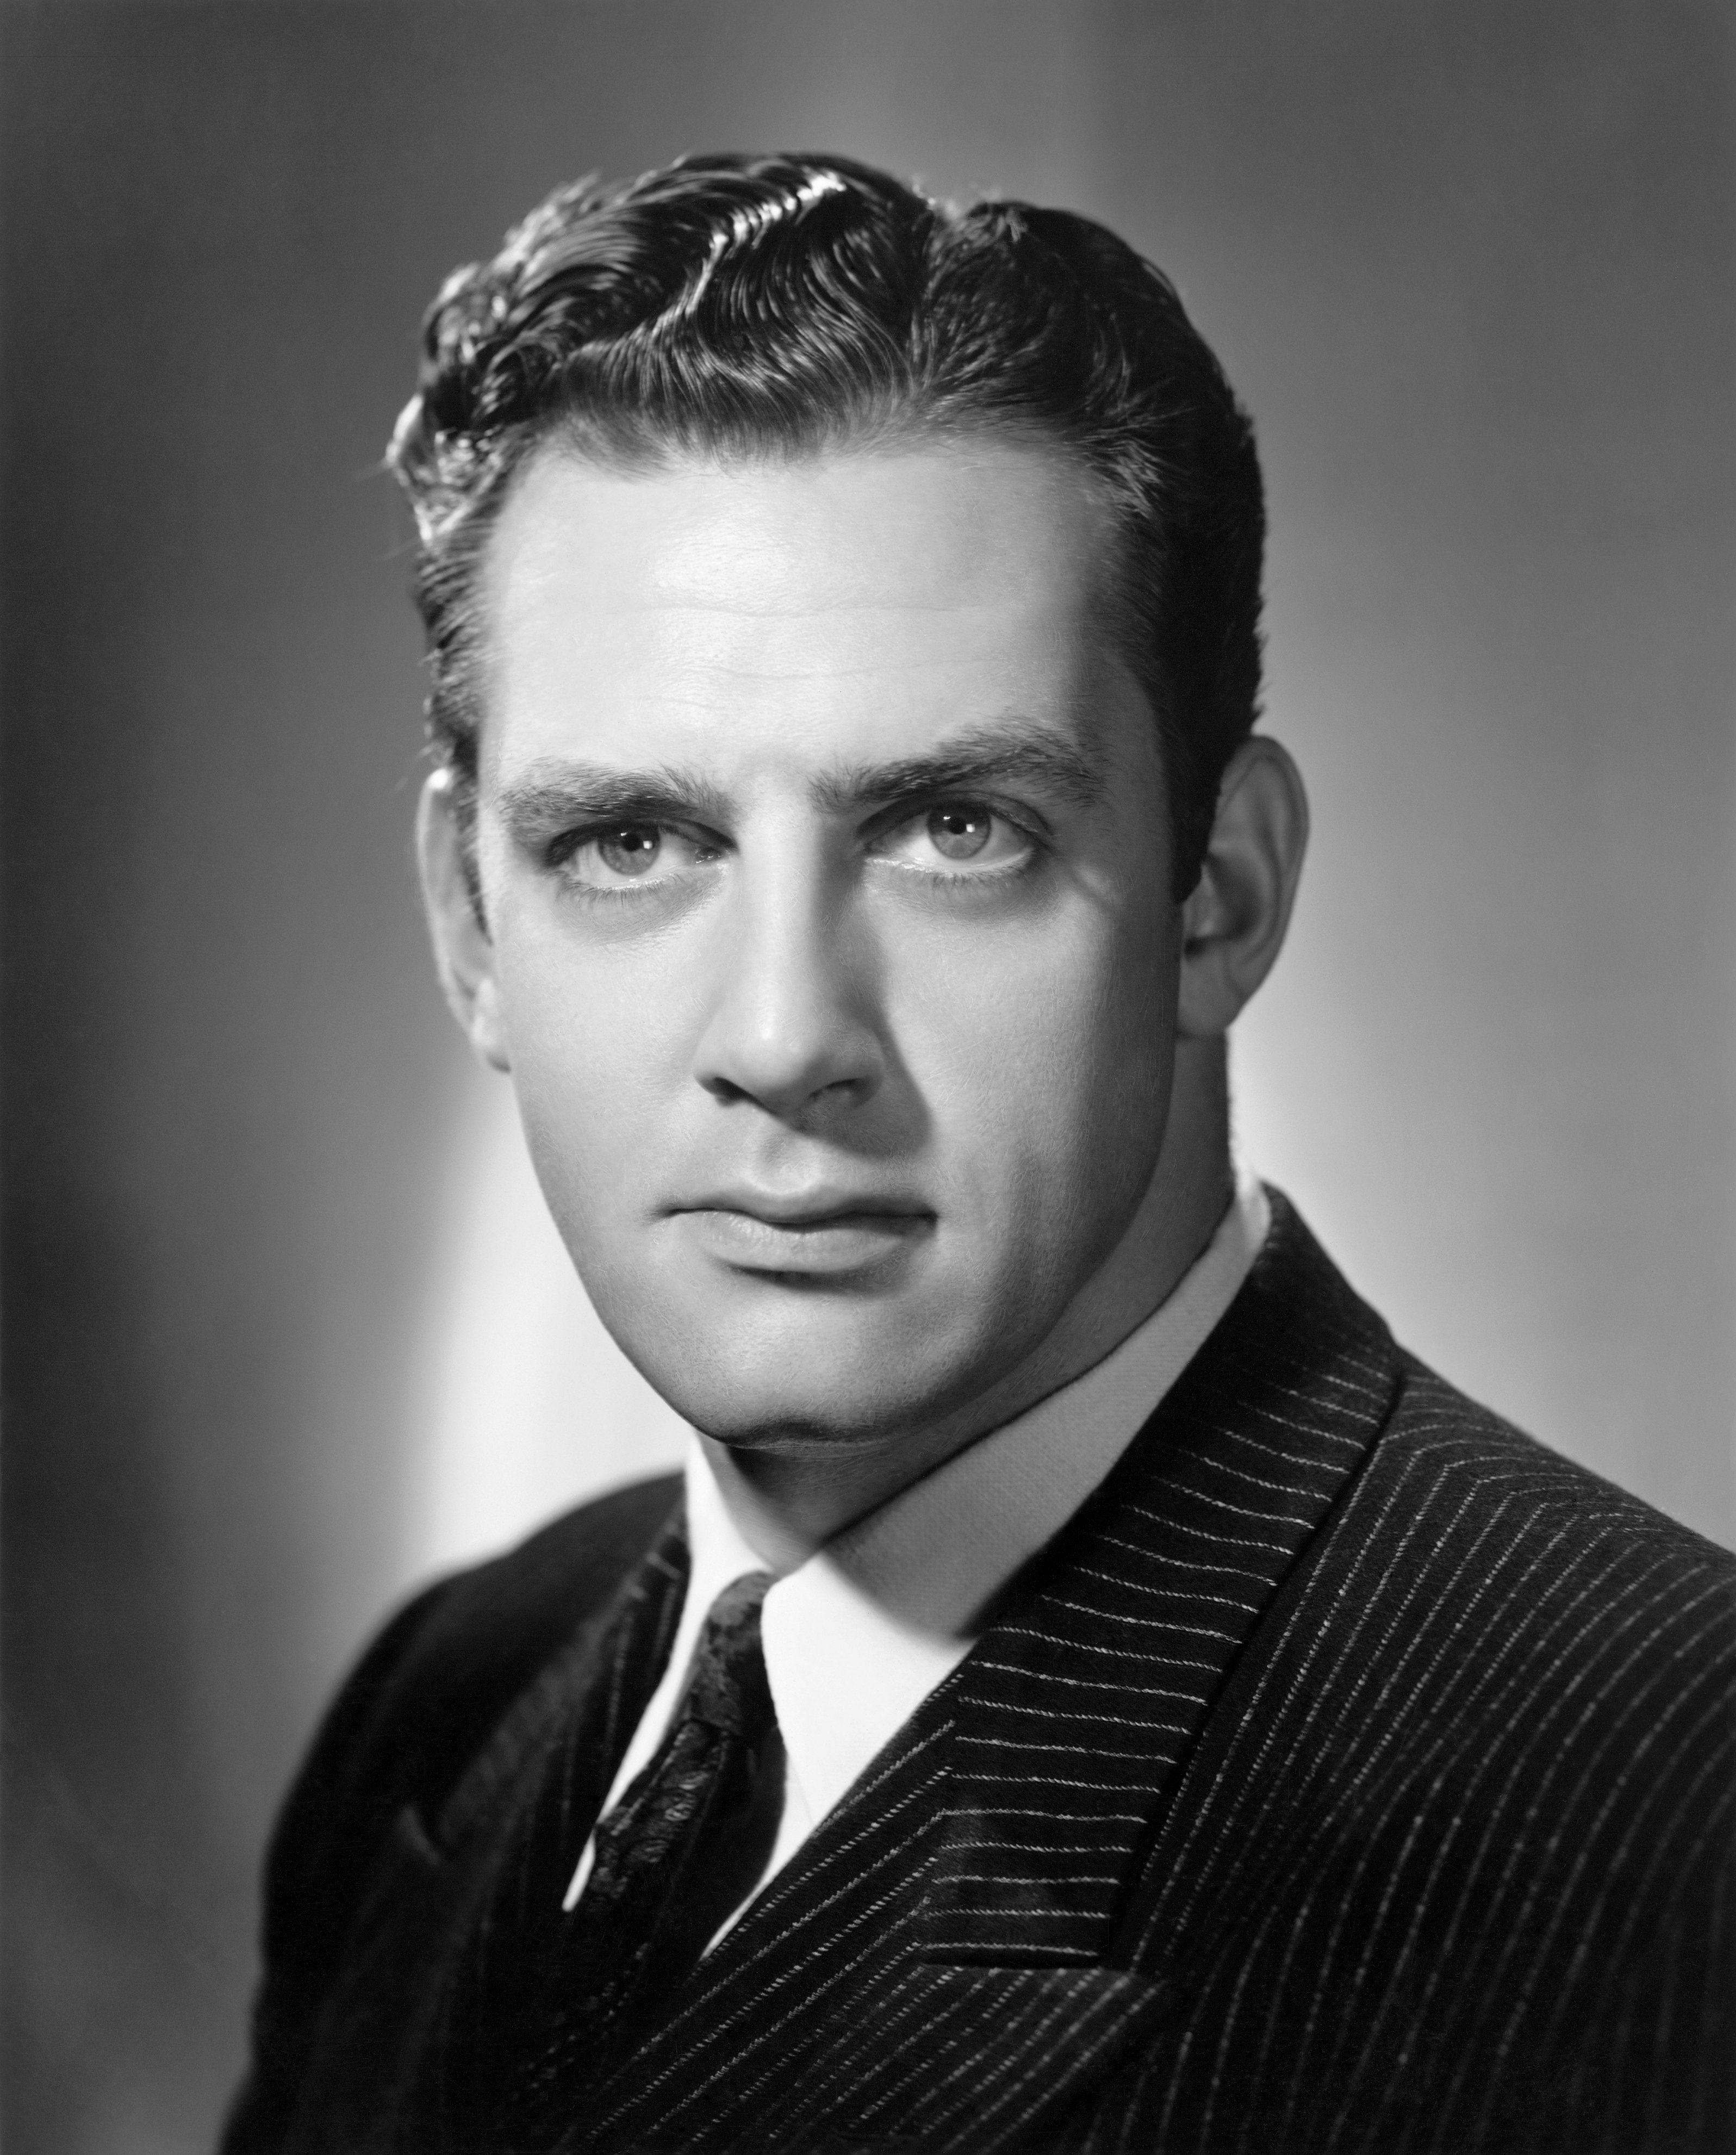 Portrait of Actor Raymond Burr. | Source: Getty Images